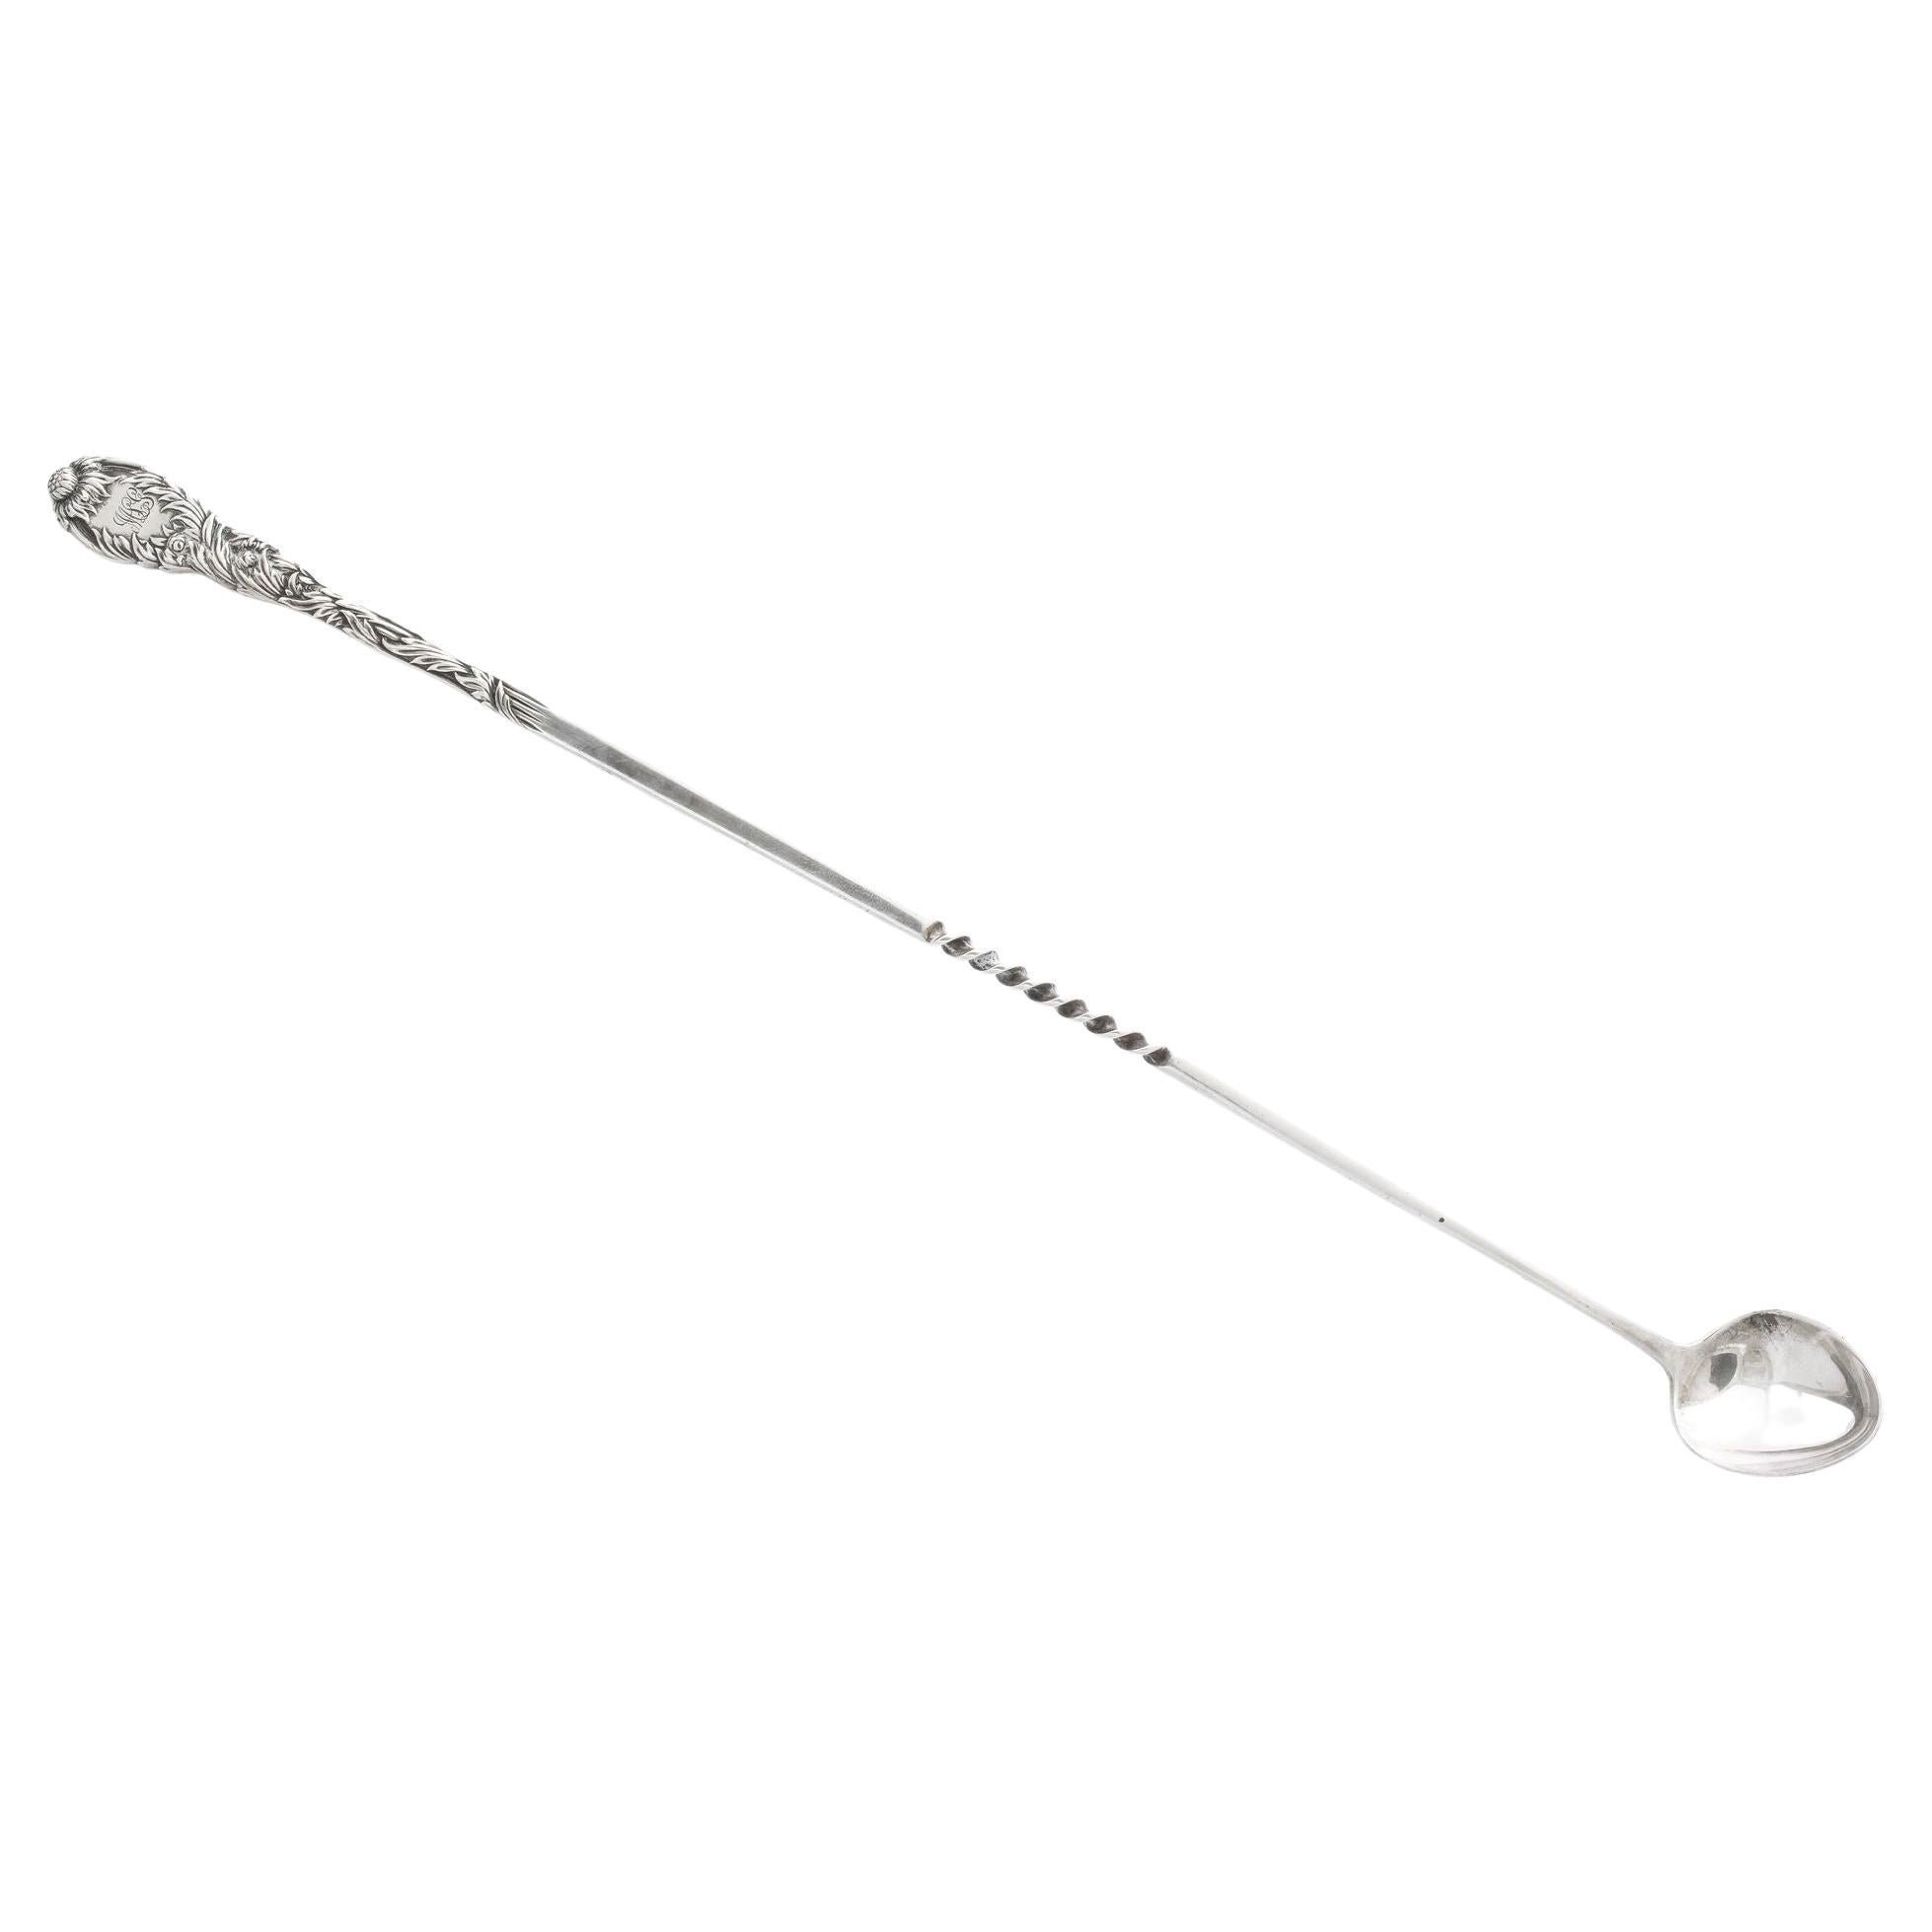 Chrysanthemum by Tiffany Sterling Silver Claret Ladle Twist Handle For Sale